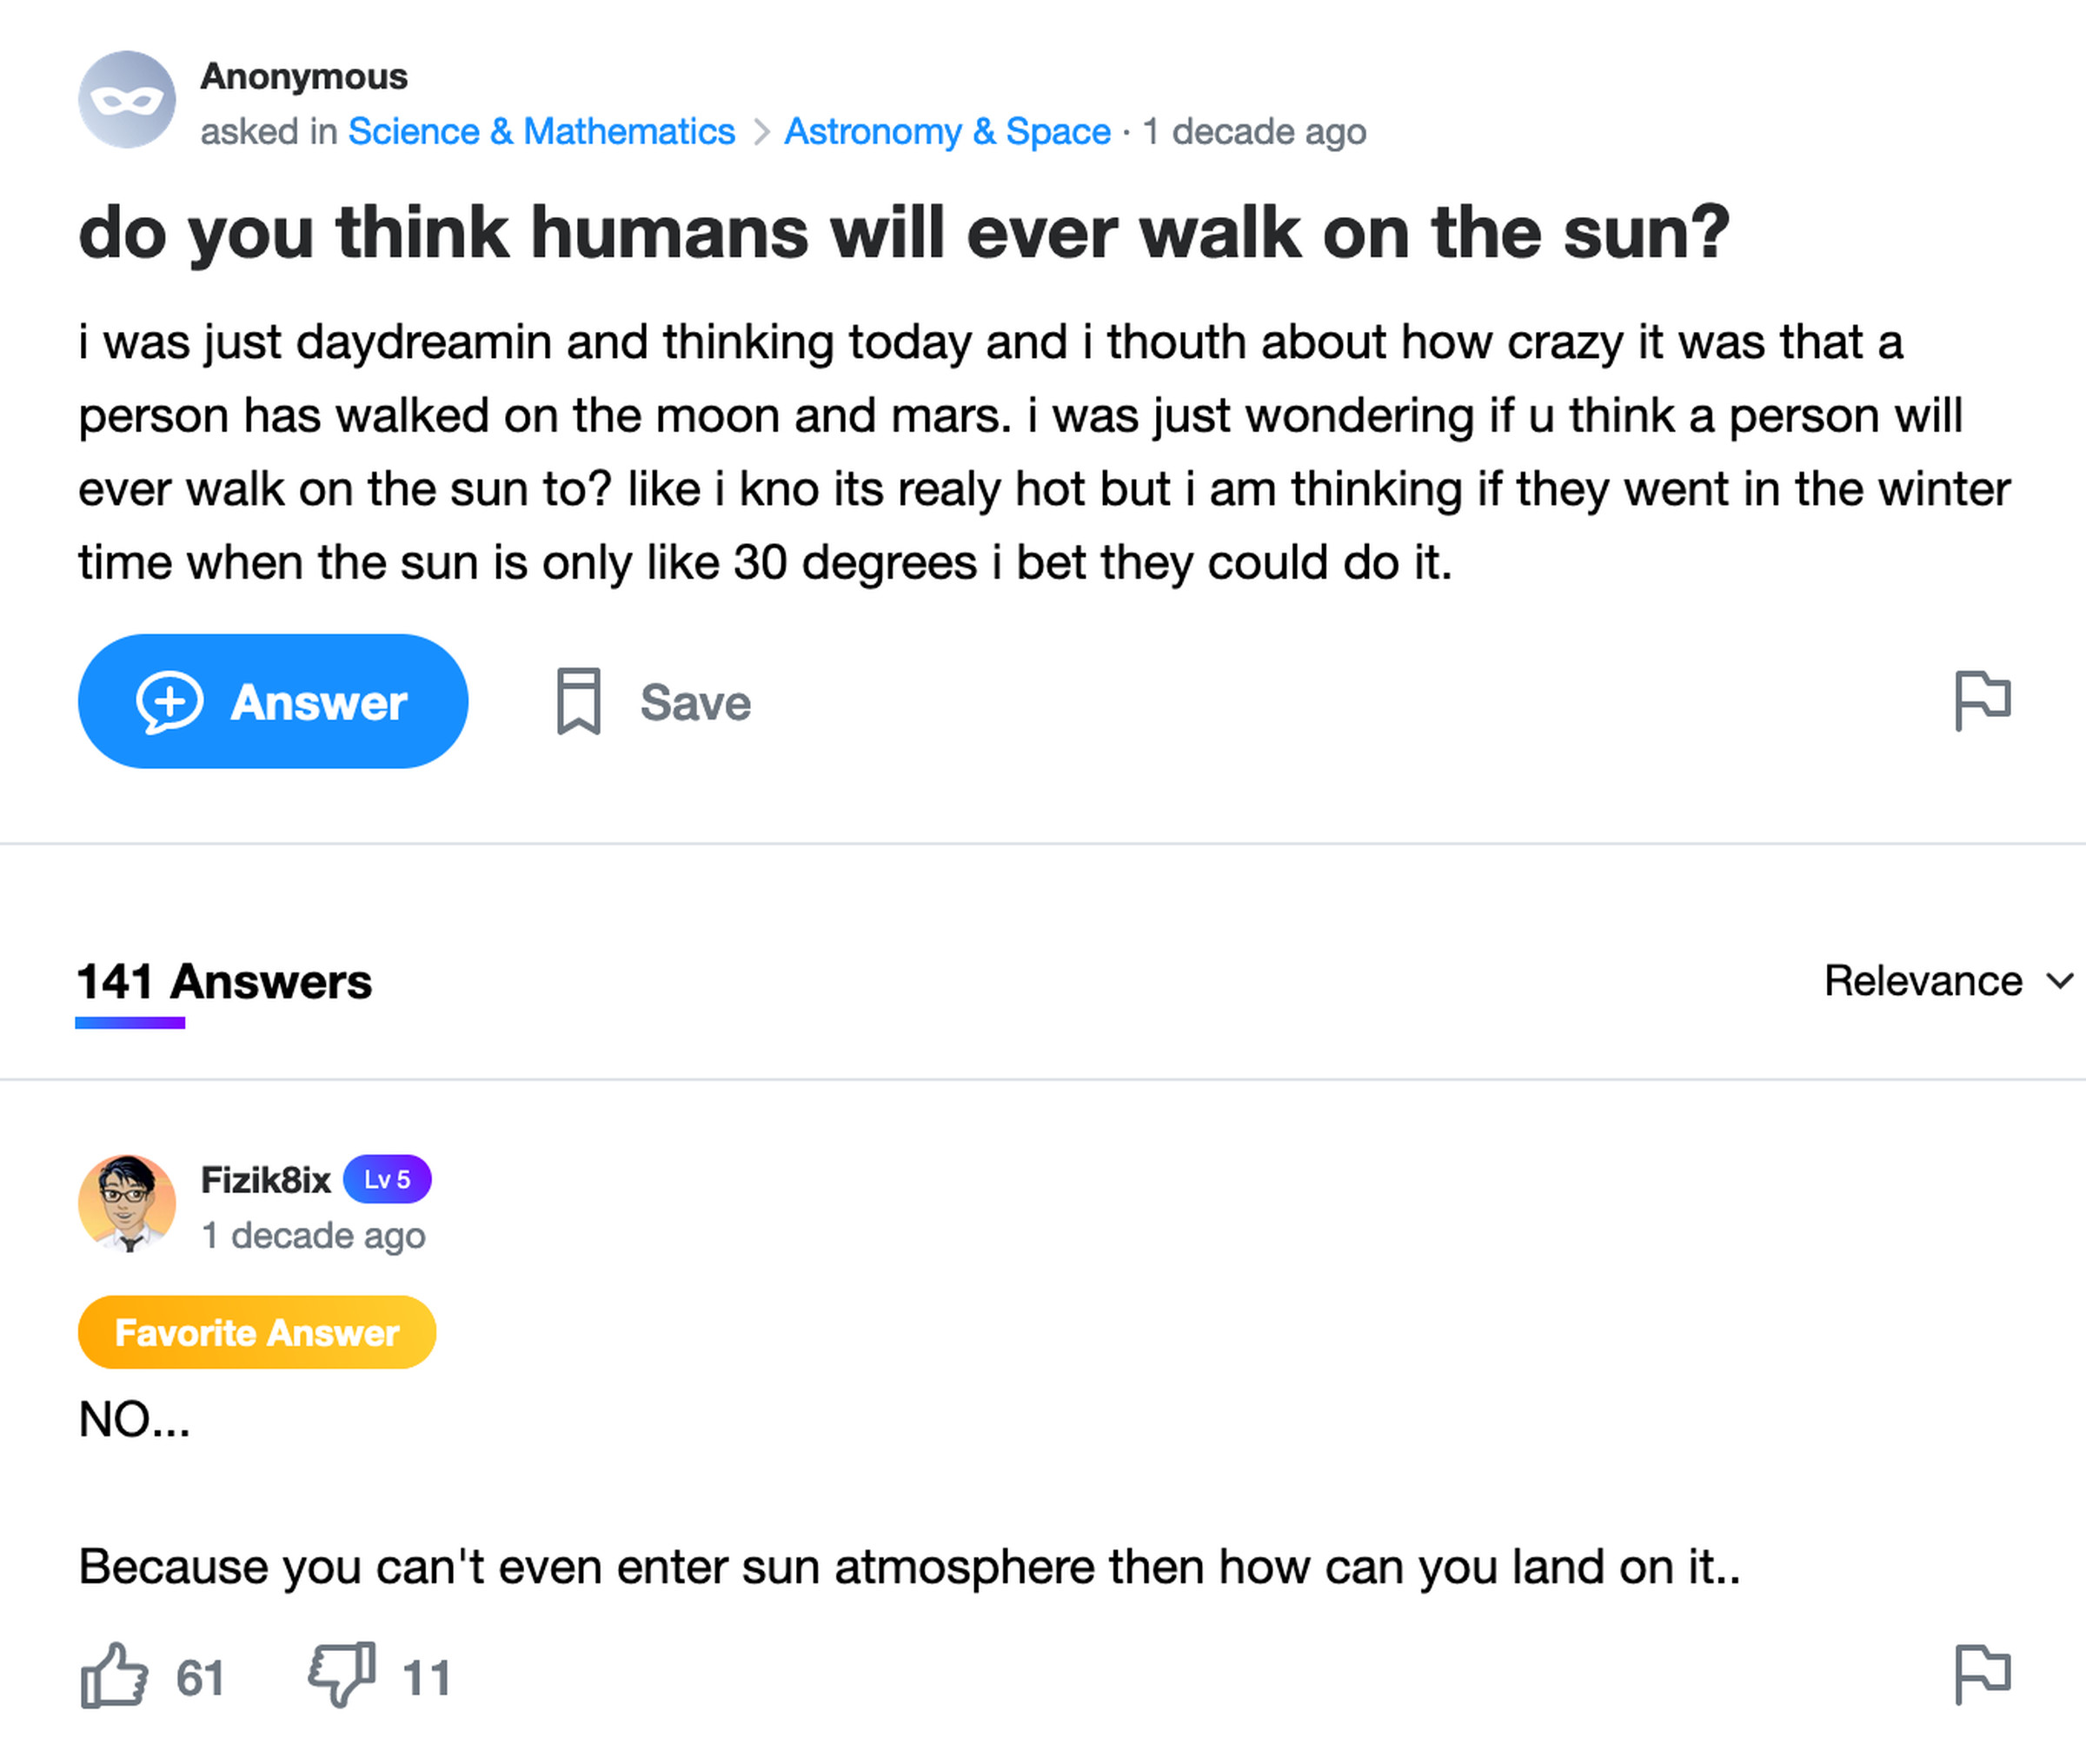 Yahoo Answers post: do you think humans will ever walk on the sun? i was just daydreamin and thinking today and i thouth about how crazy it was that a person has walked on the moon and mars. i was just wondering if u think a person will ever walk on the sun to? like i kno its realy hot but i am thinking if they went in the winter time when the sun is only like 30 degrees i bet they could do it.